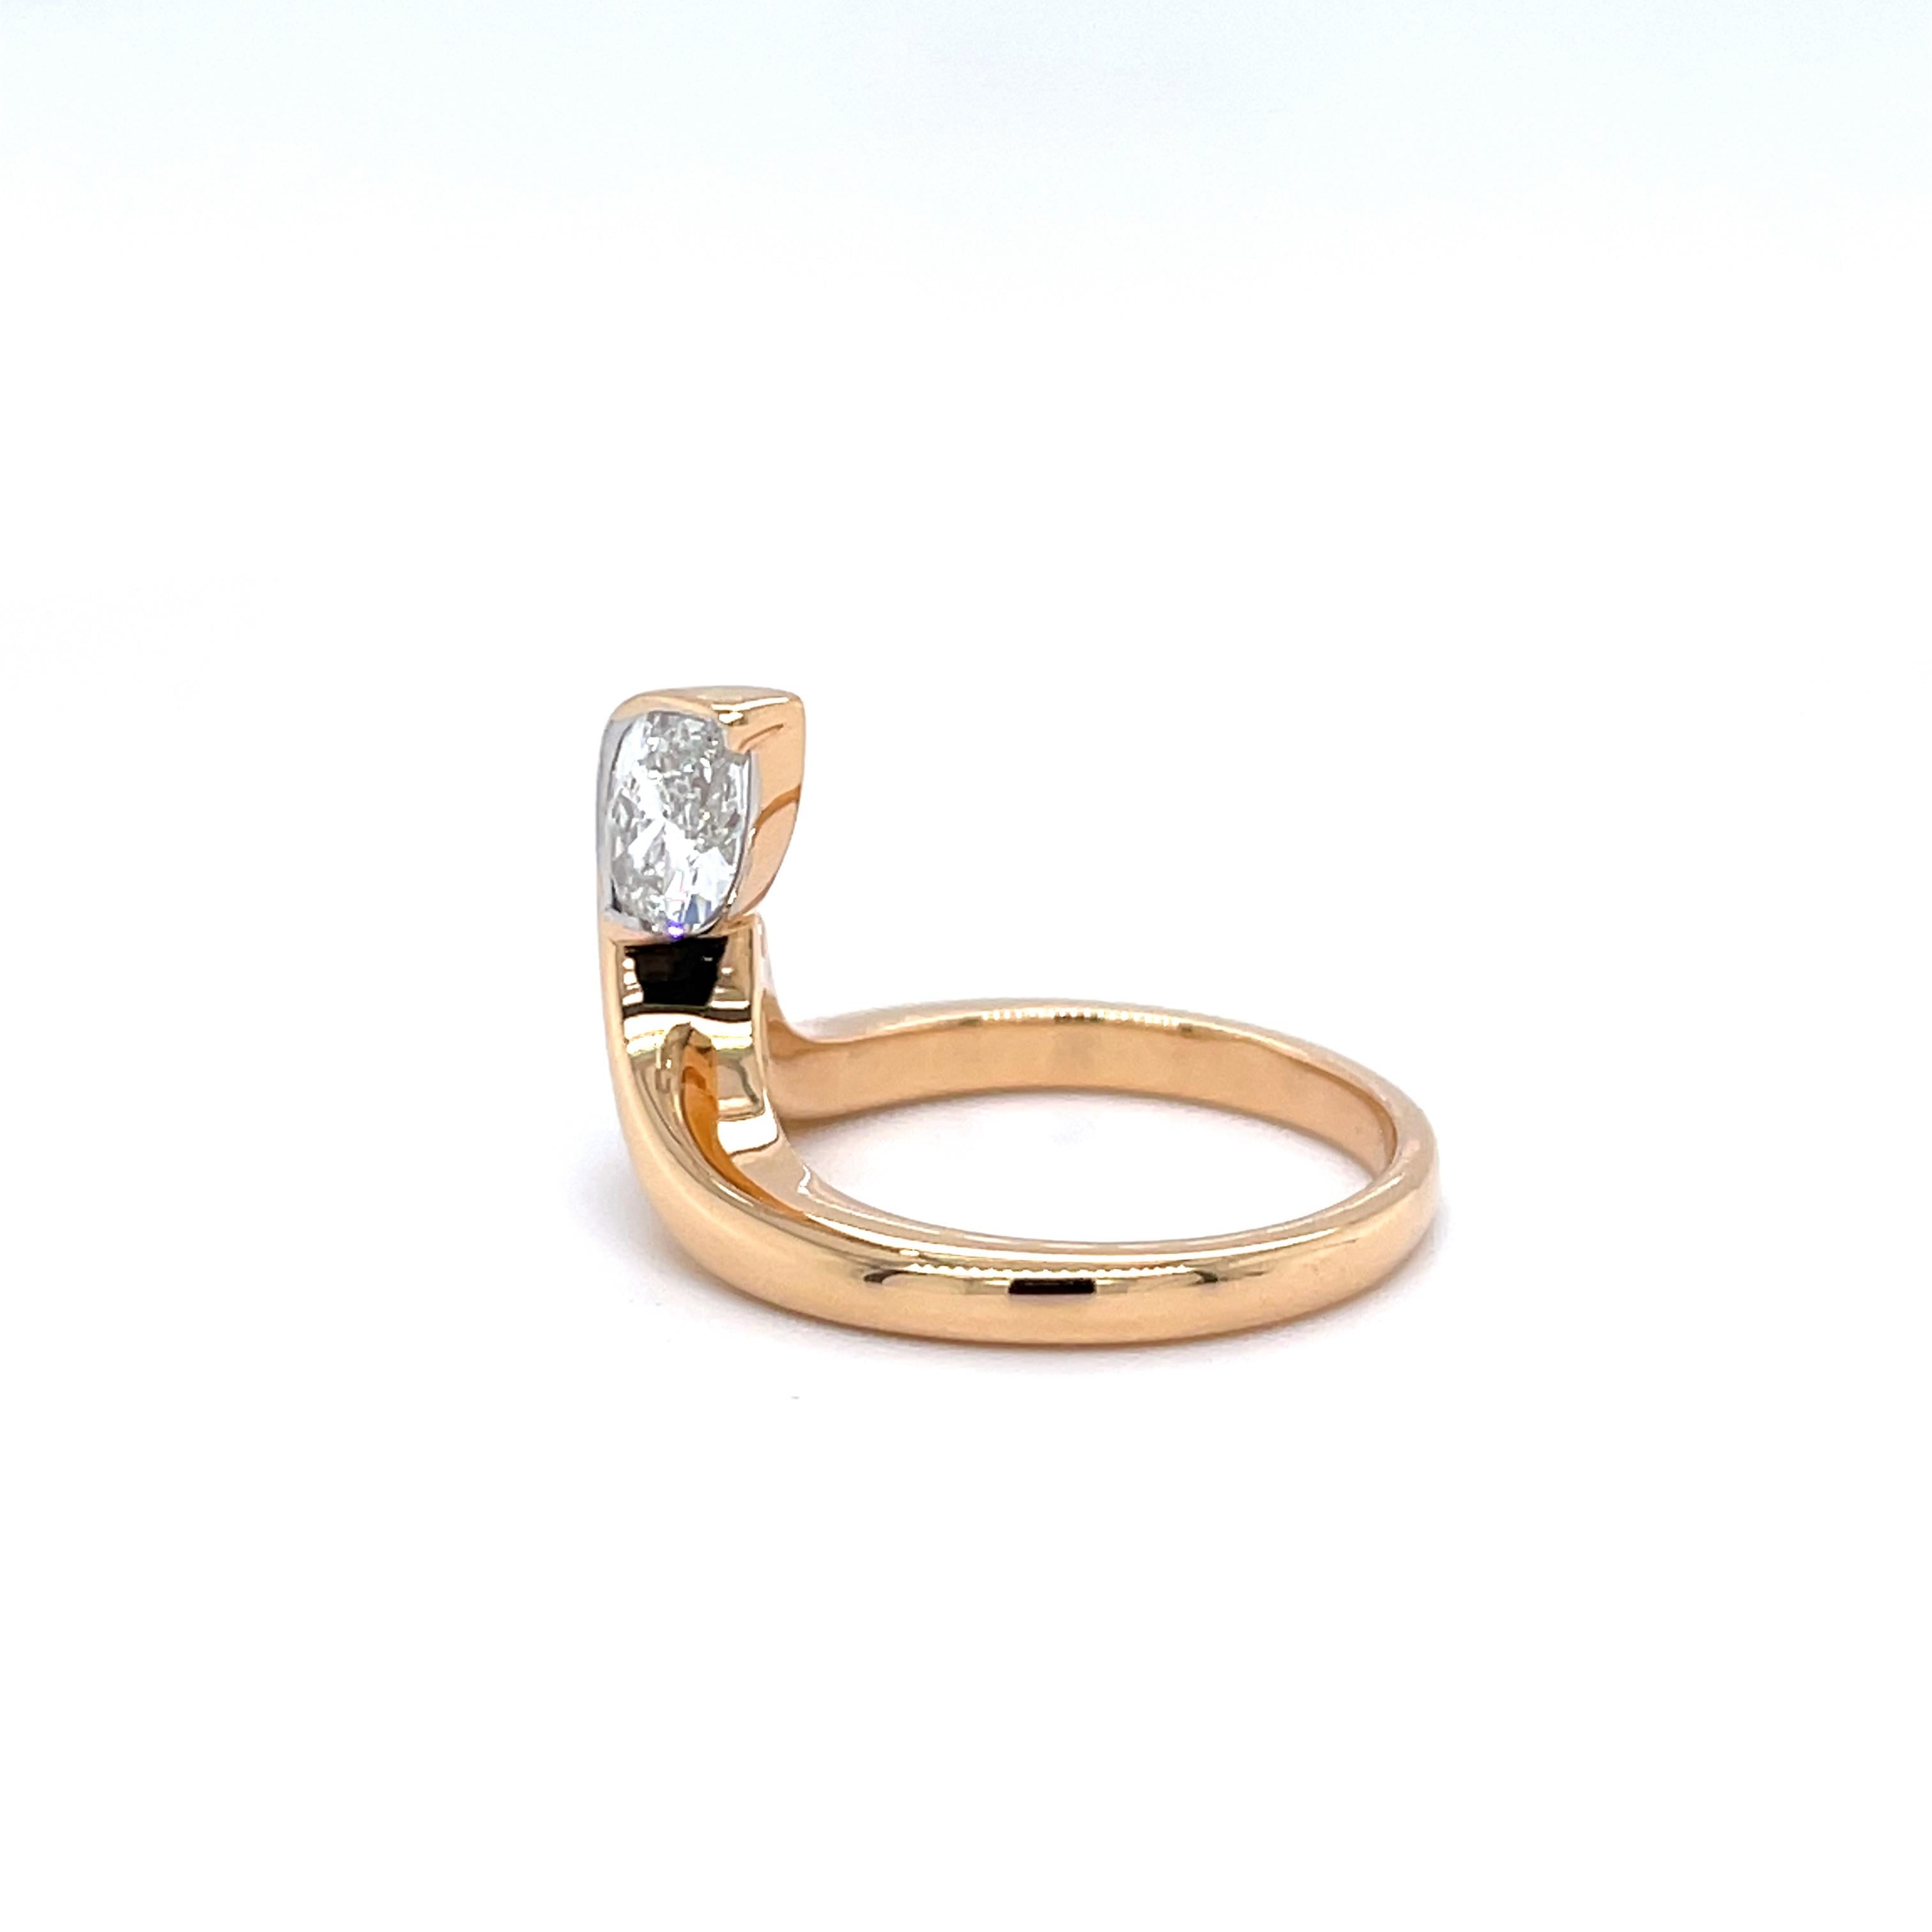 Elongated Elegance: GIA Certified Marquise Diamond Ring (0.90ct) in 18K Rose Gold

Embrace timeless design with a touch of modern flair with this captivating marquise diamond ring.  The center stone is a mesmerizing 0.90 carat marquise diamond,